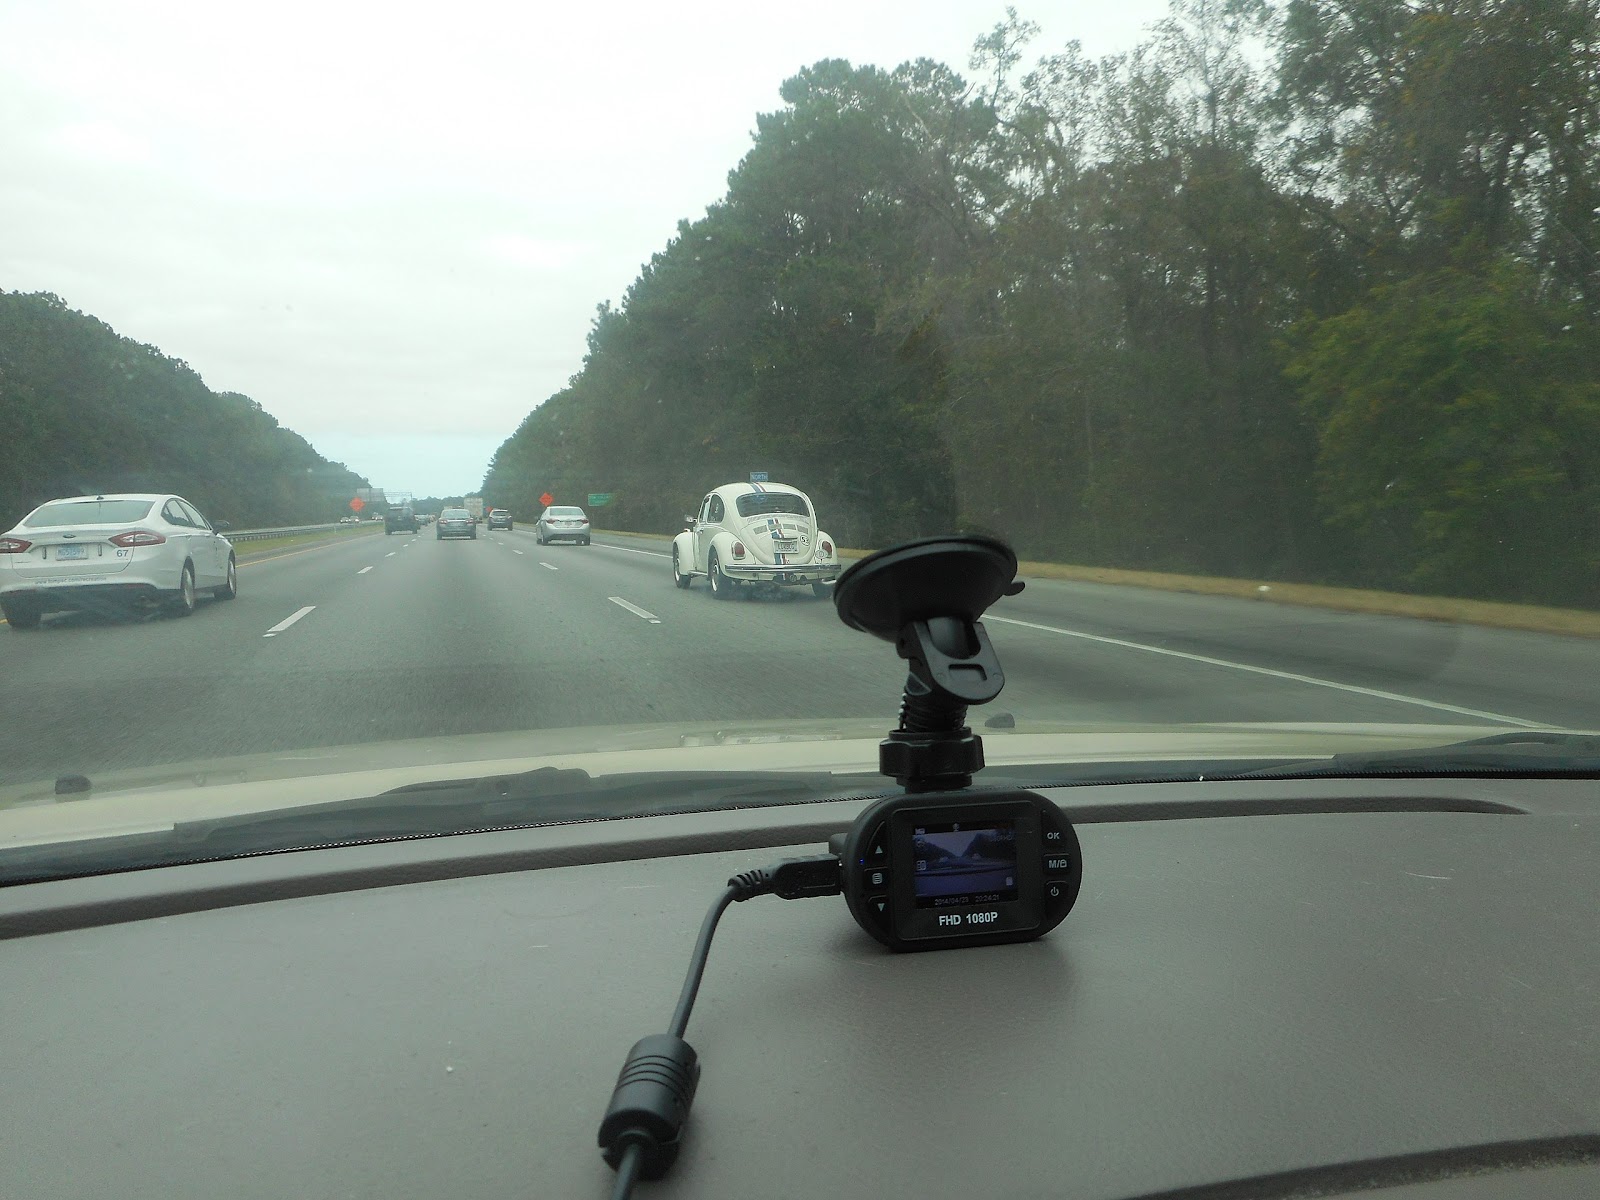 This image shows the Car Dashcam  near the car's front mirror.